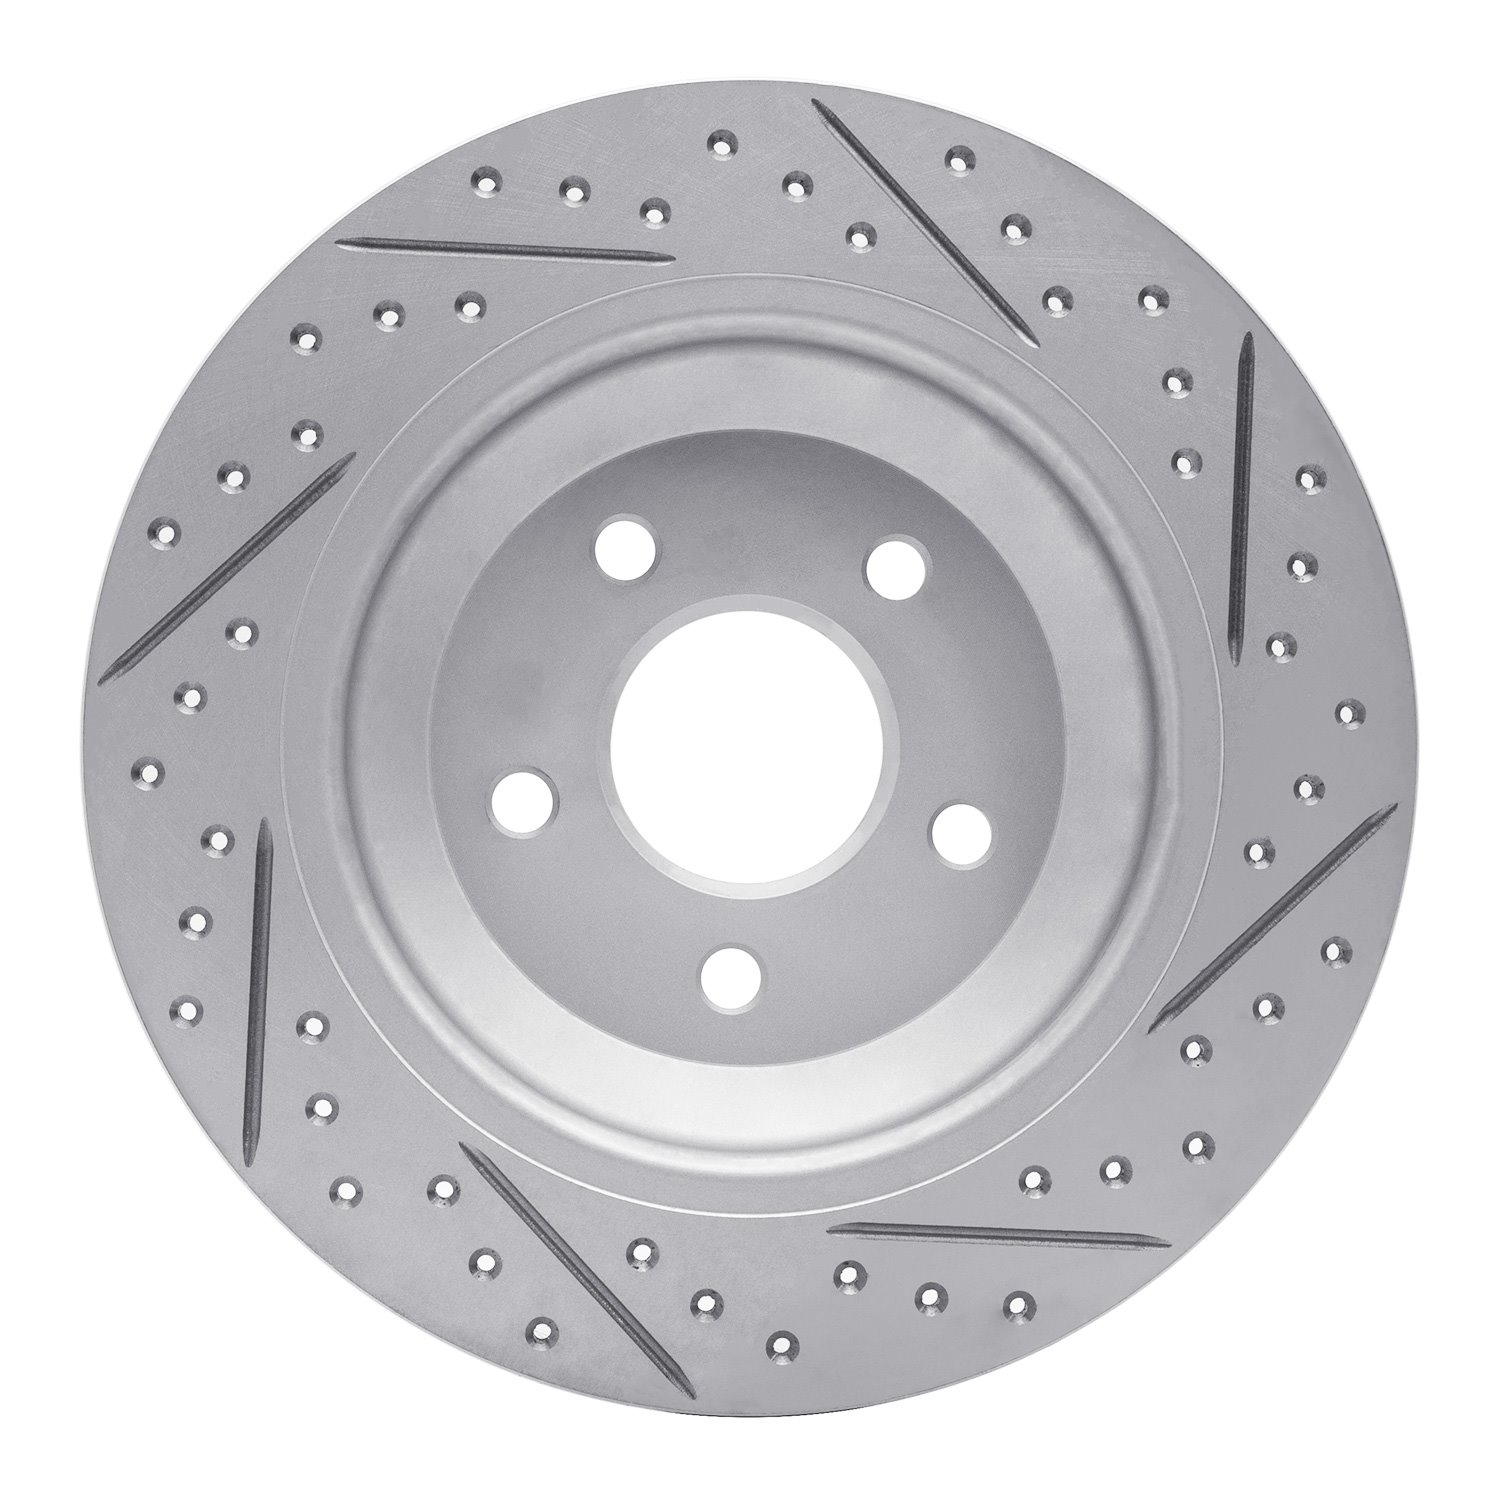 830-54262L Geoperformance Drilled/Slotted Brake Rotor, Fits Select Ford/Lincoln/Mercury/Mazda, Position: Rear Left